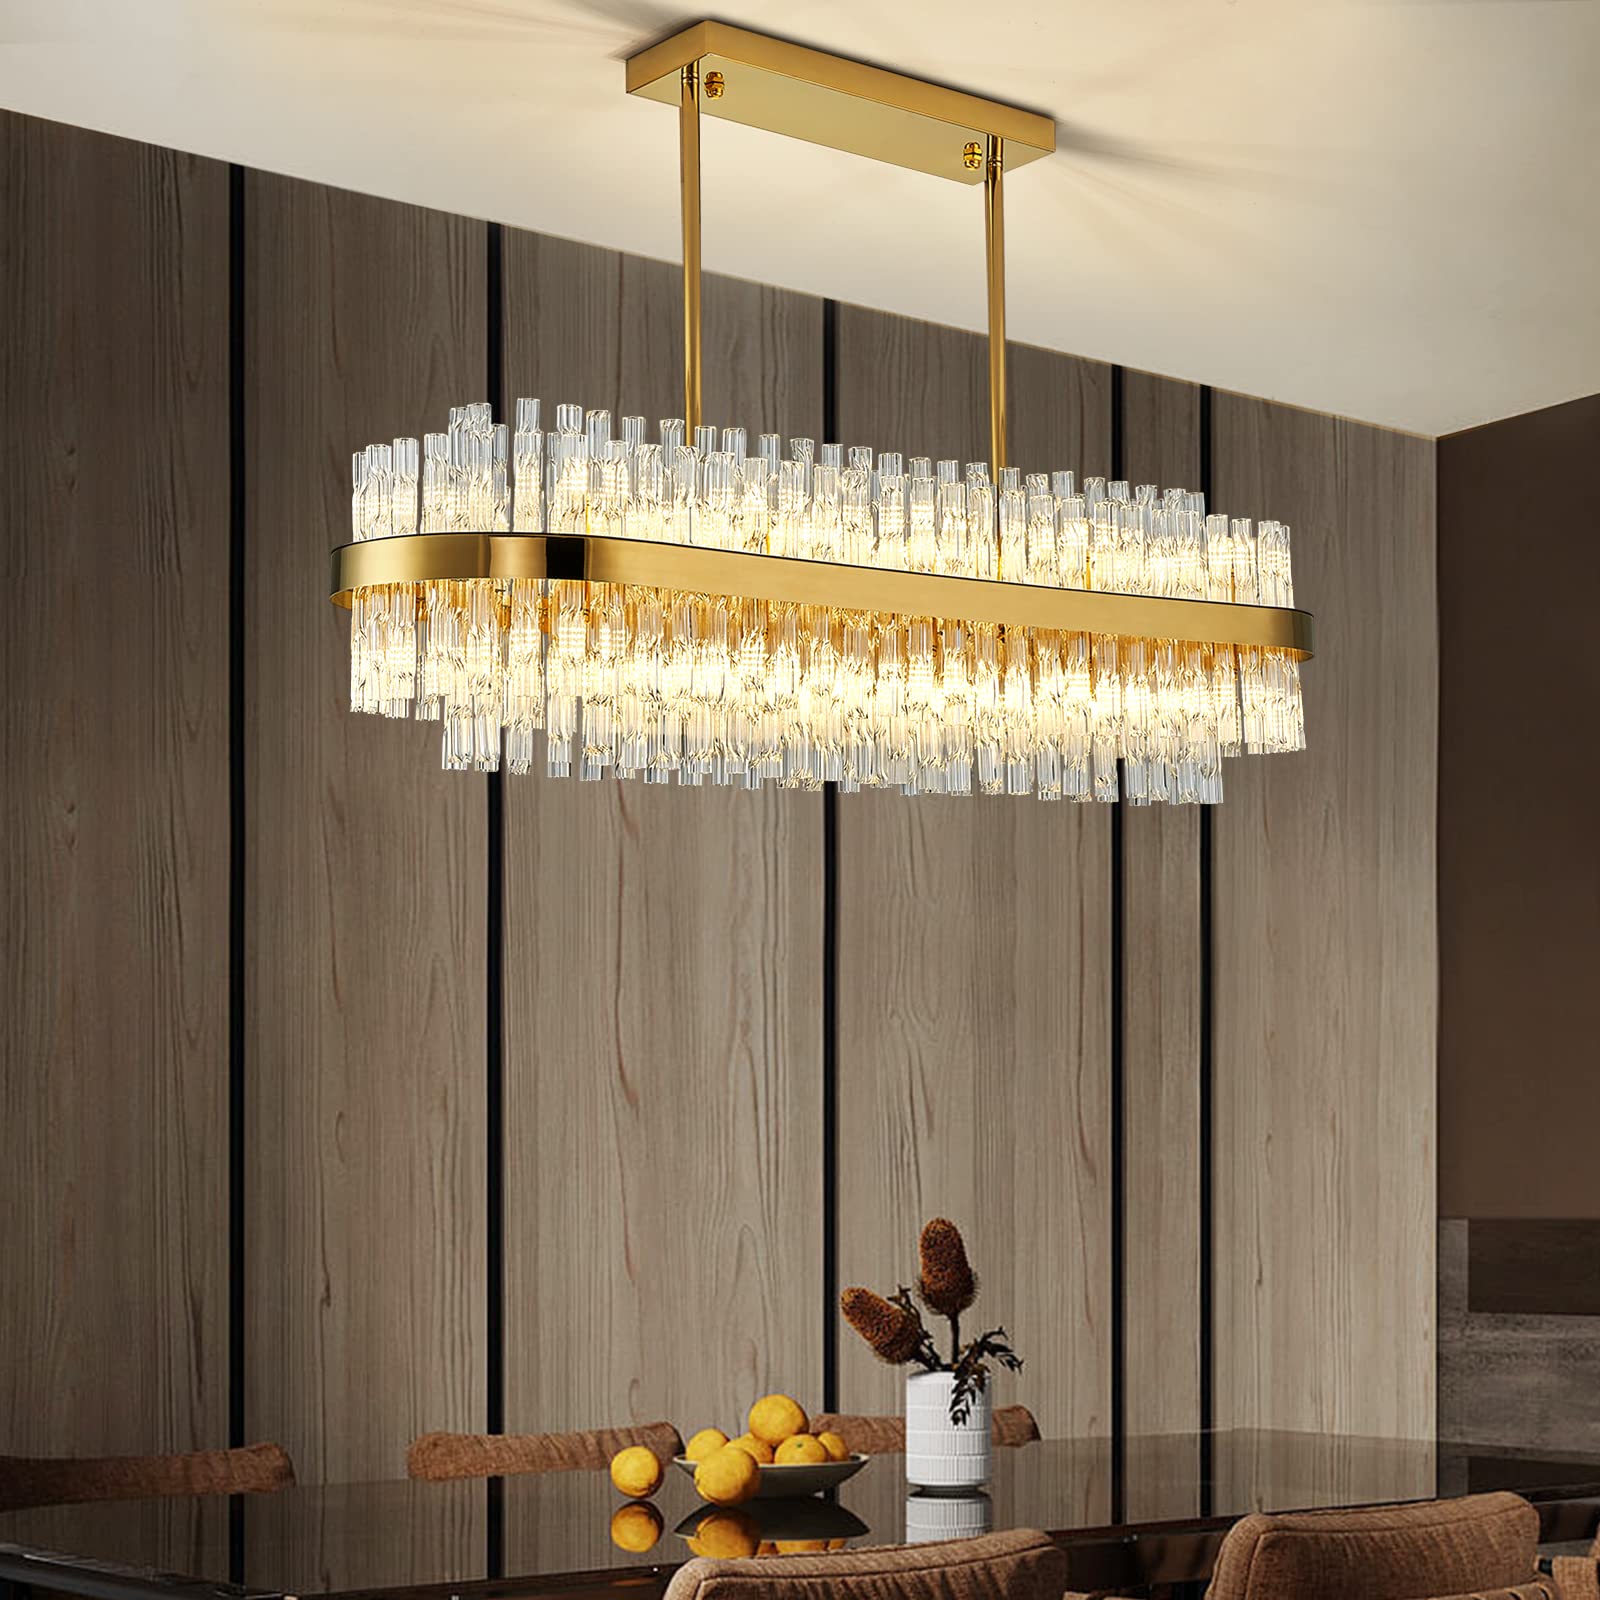 Siljoy 41 Inch Modern crystal chandeliers, gold Rectangle crystal ceiling Light Fixture with Wave glass Rods, 3-color Dimmable R